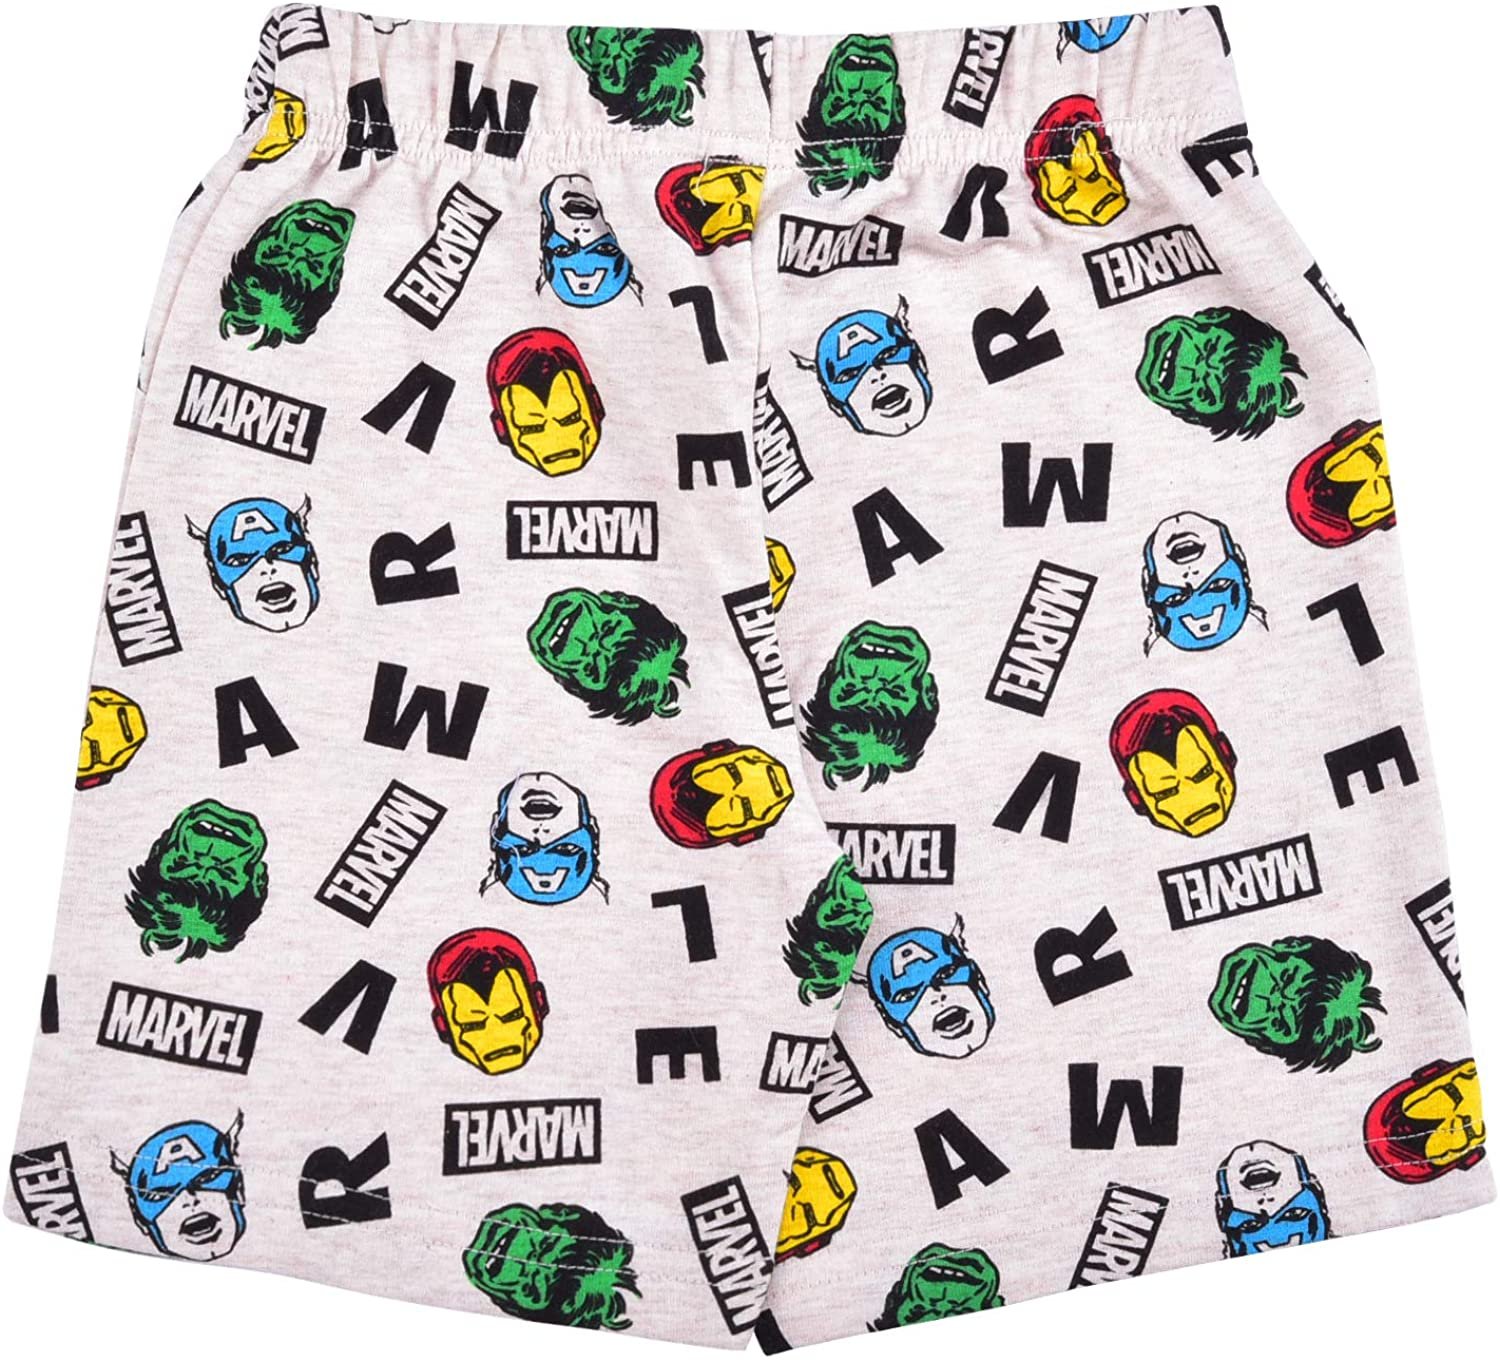 Marvel Superheroes 2 Pack Shorts Set for Boys, Ironman, Hulk and Captain America - image 5 of 5